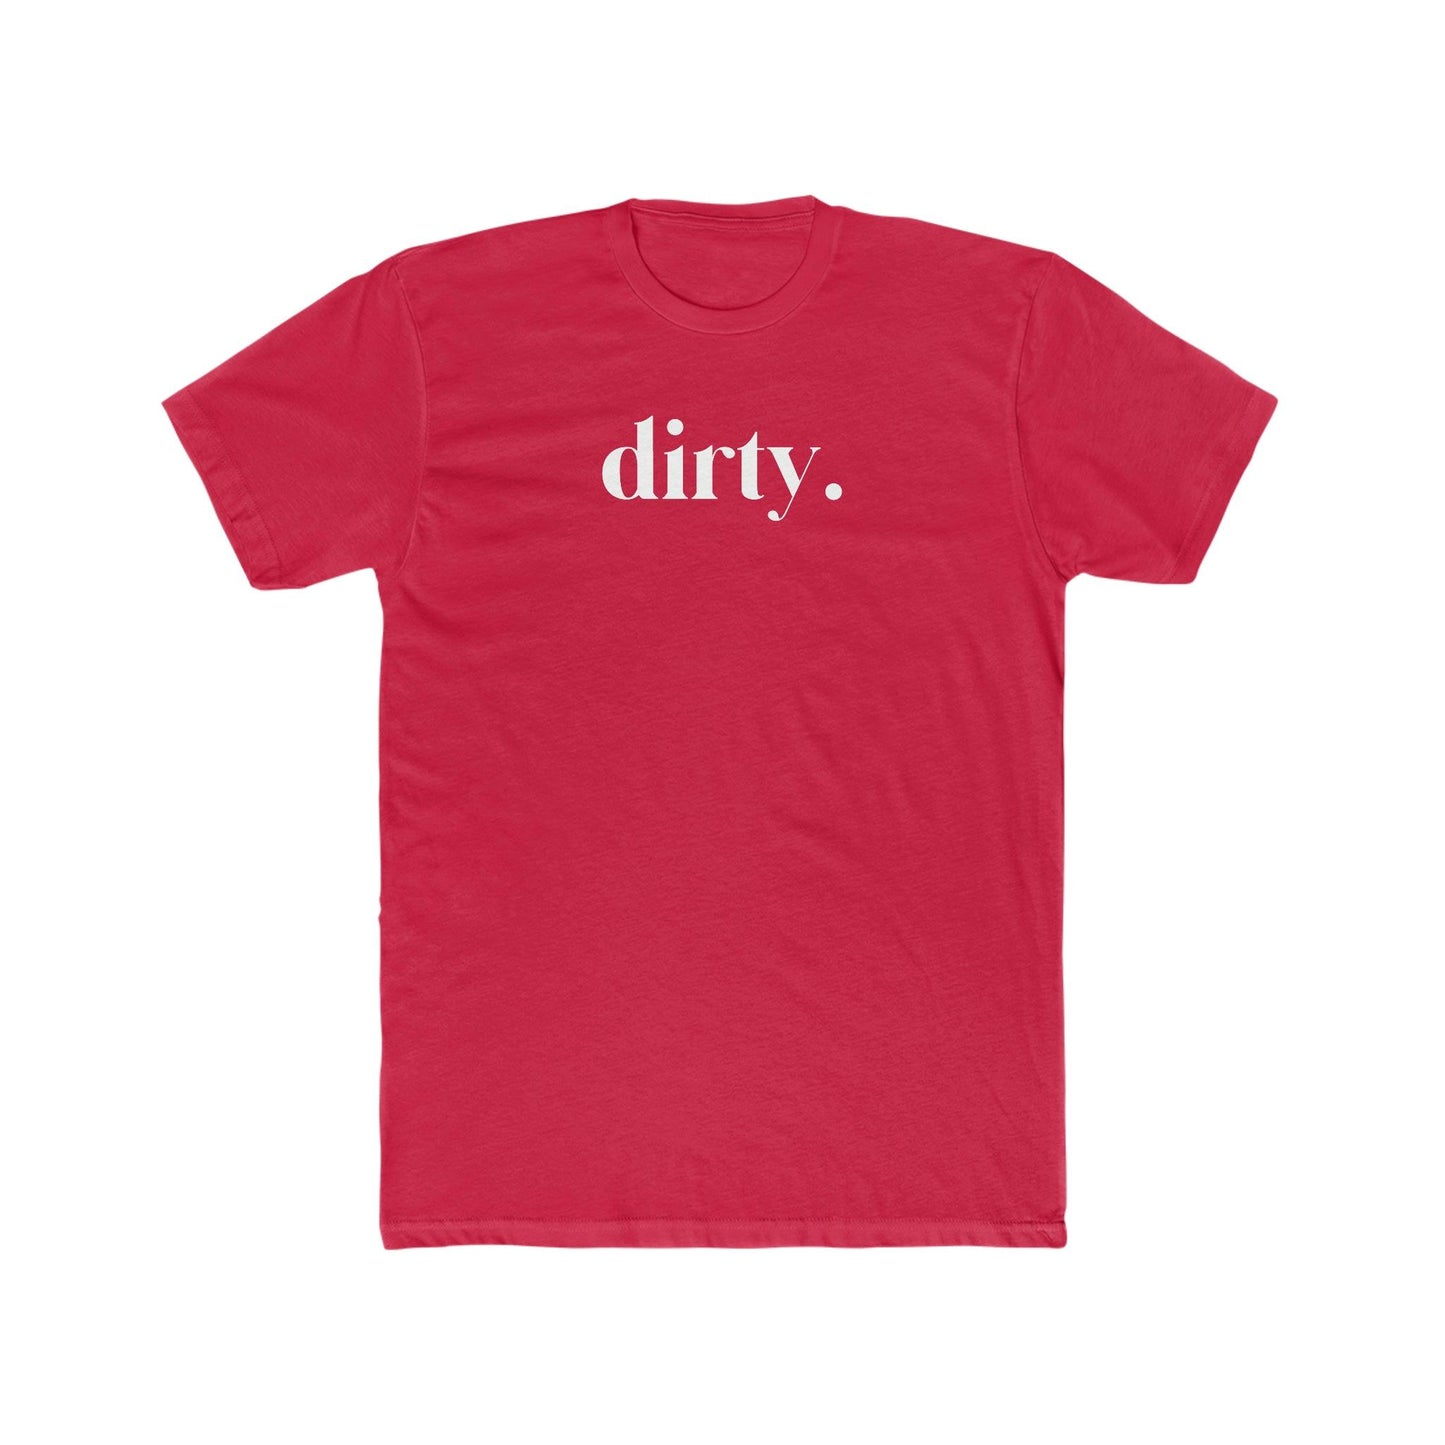 Dirty - Wicked Naughty Apparel